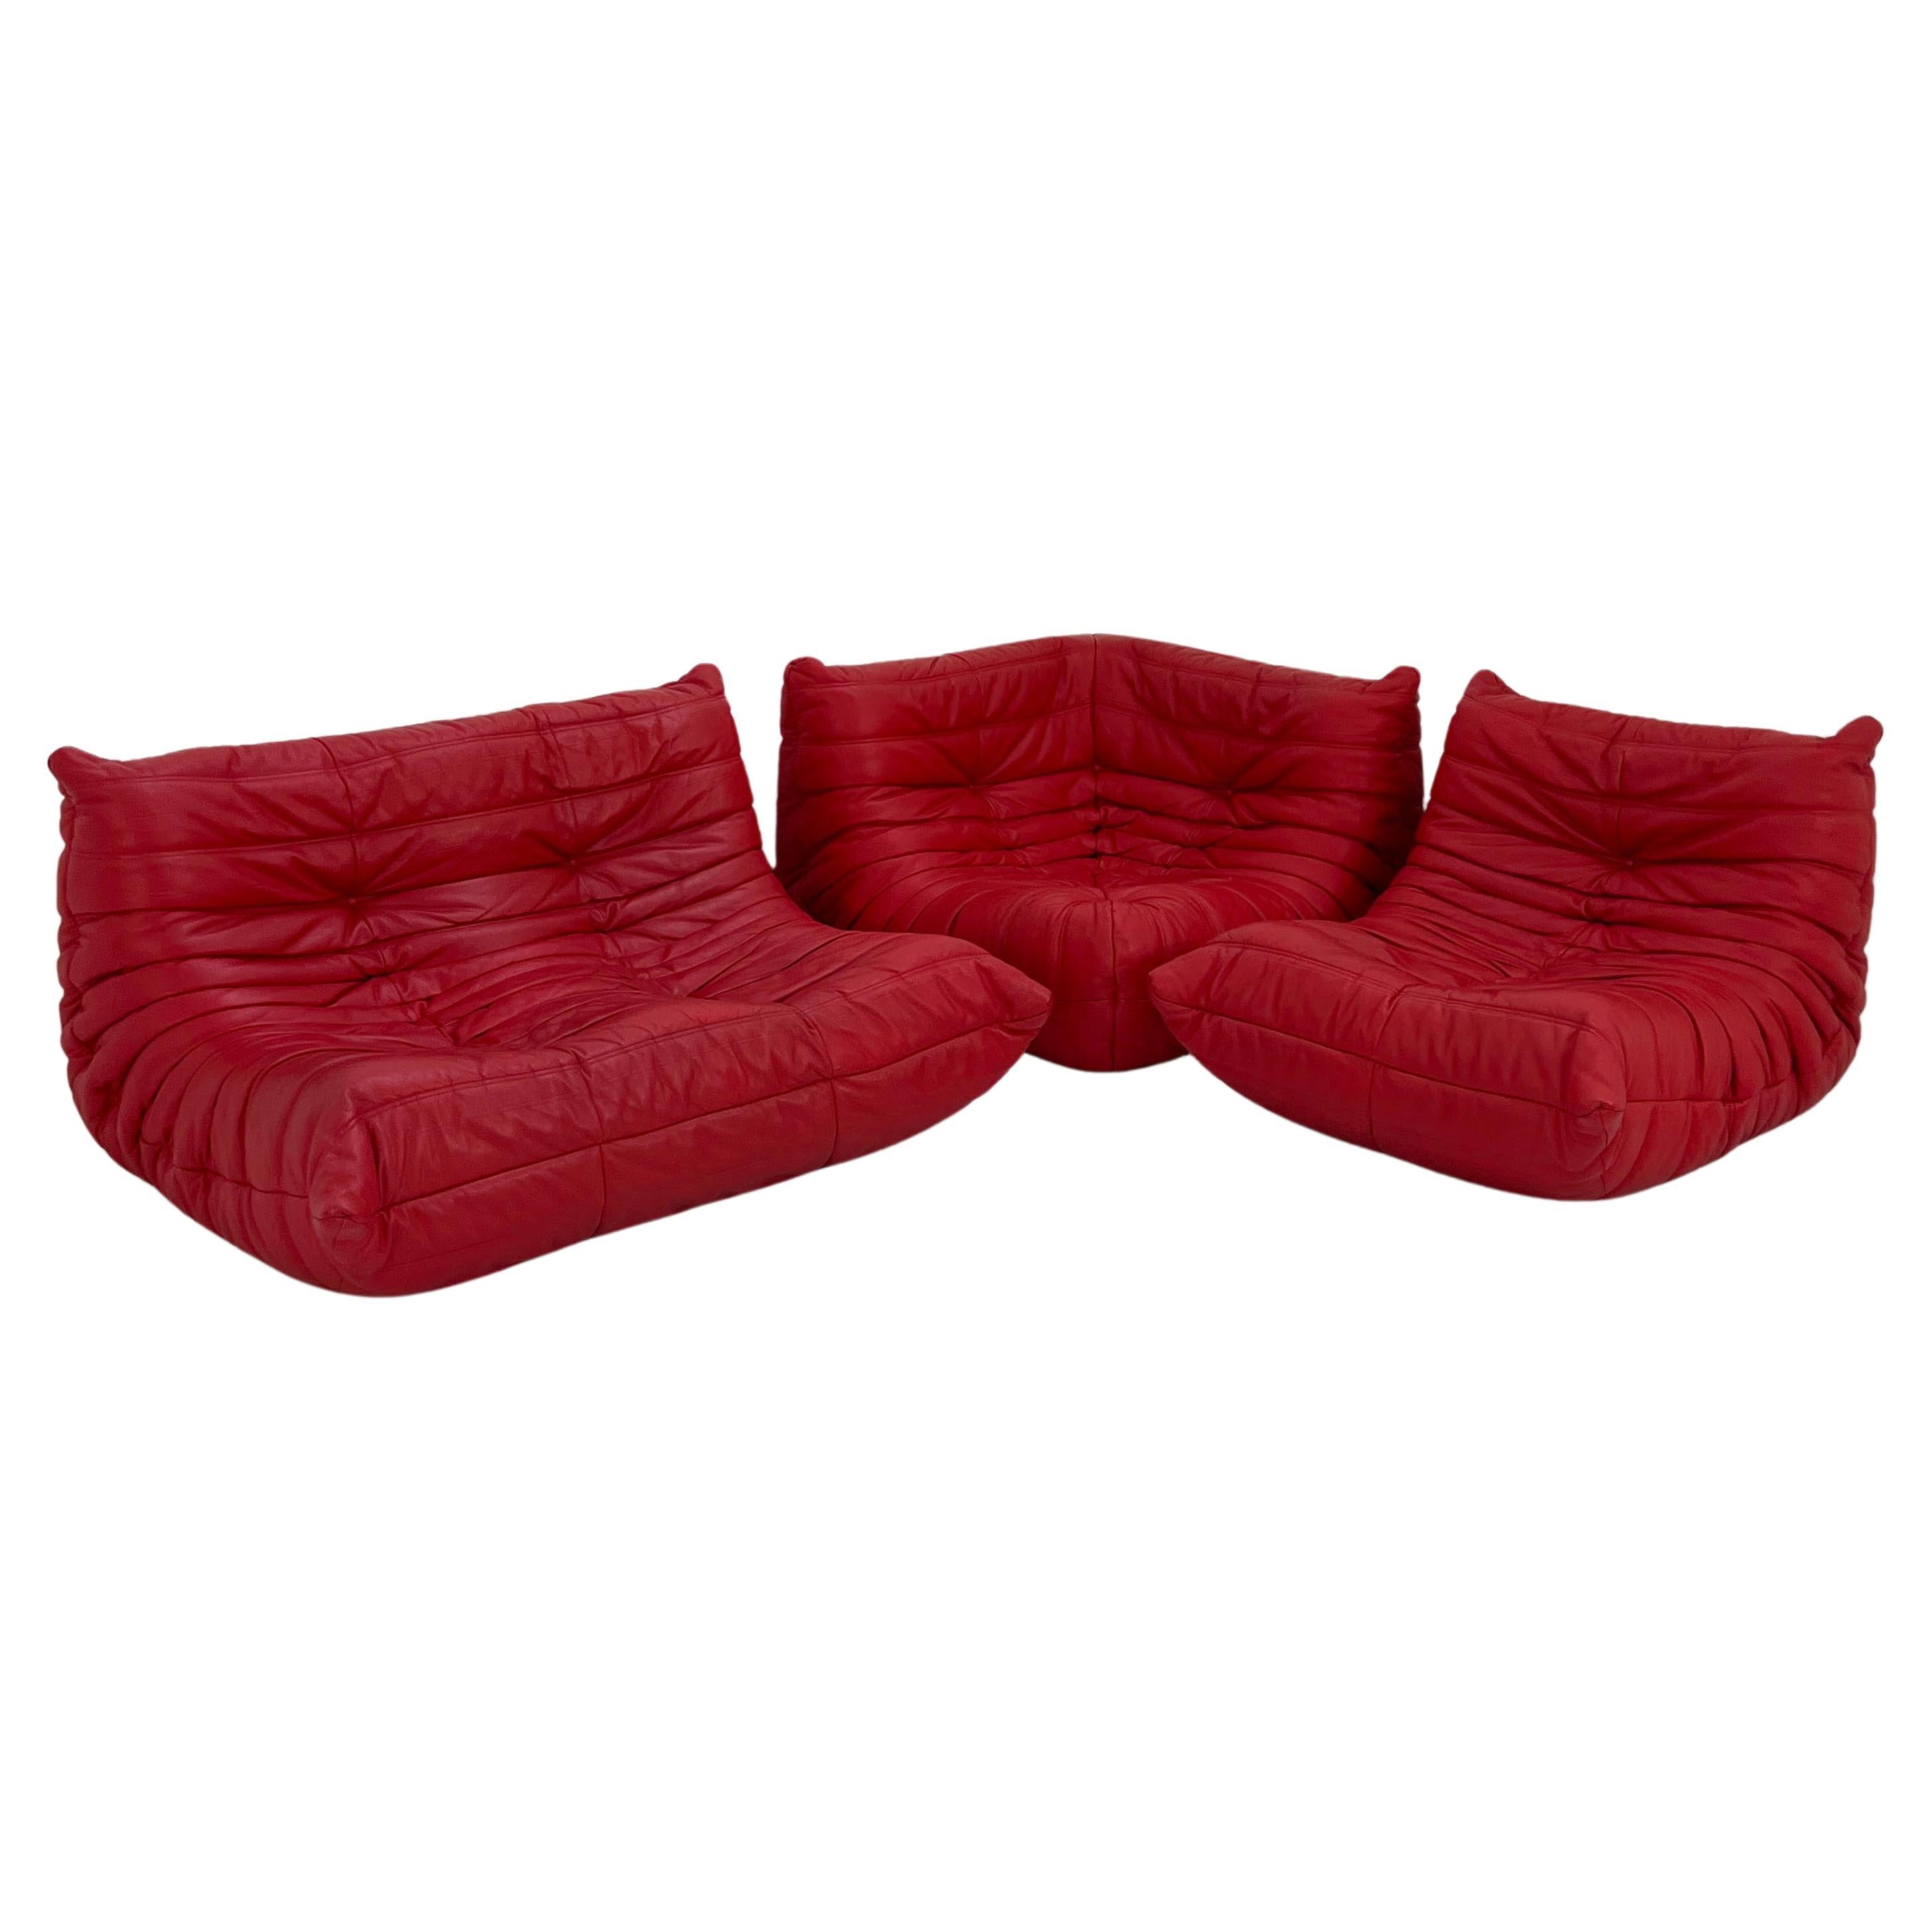 Togo Sofa Set in Red Leather by Michel Ducaroy for Ligne Roset, 1970s For Sale